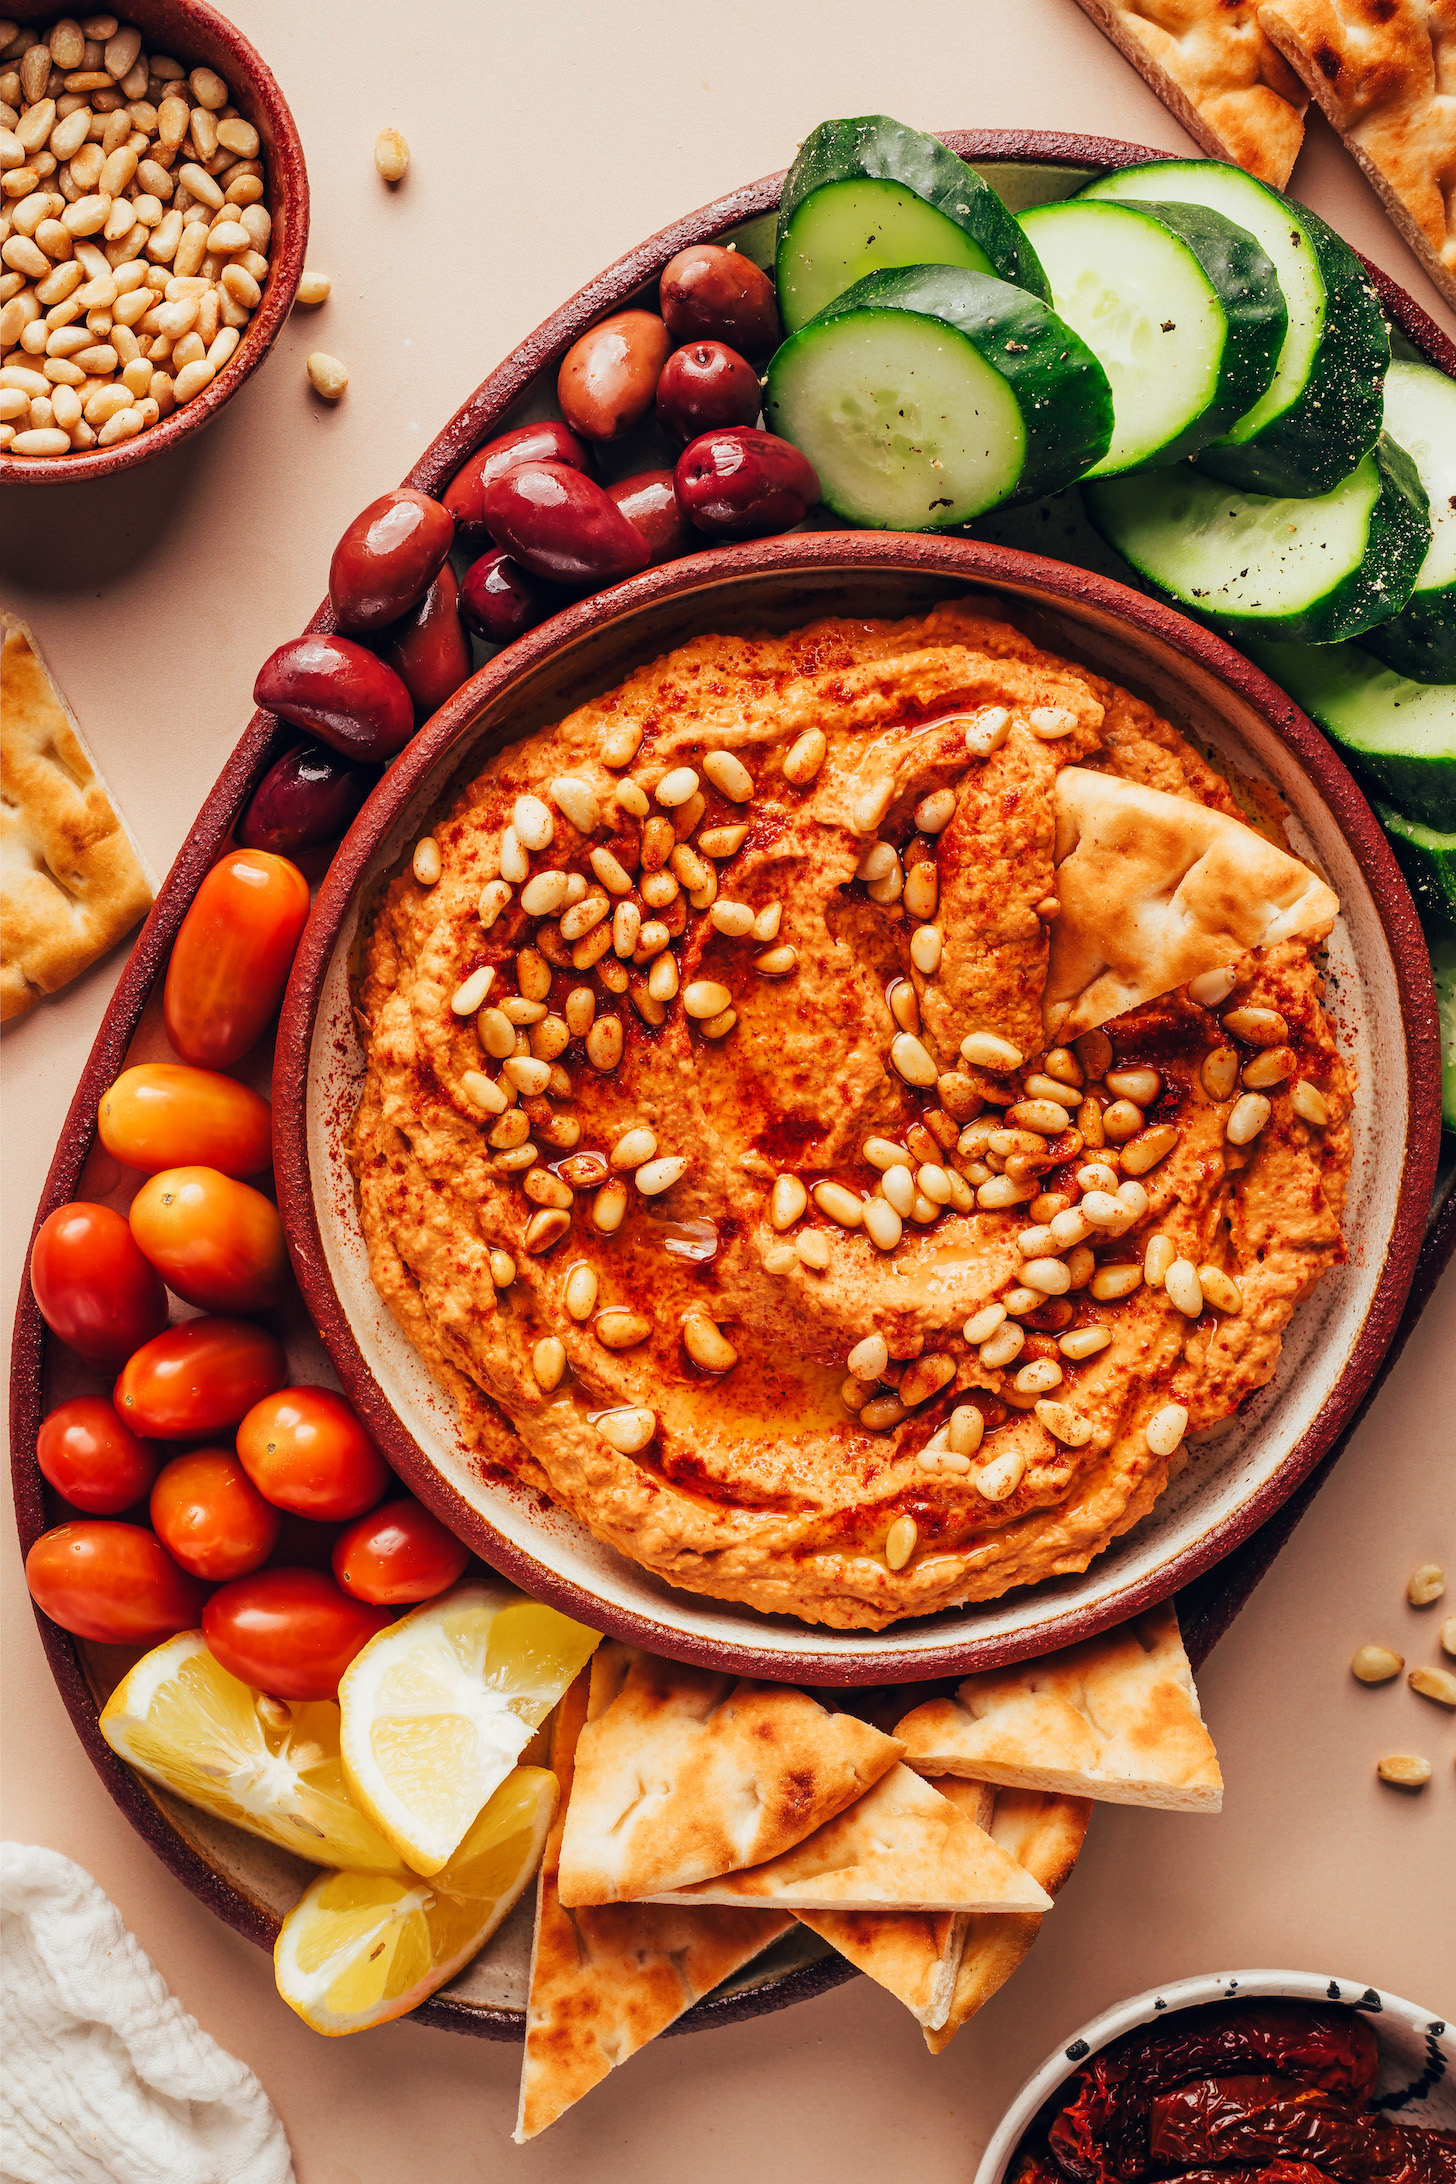 Bowl of sun-dried tomato hummus surrounded by pita bread, lemon slices, baby tomatoes, olives, and cucumber slices